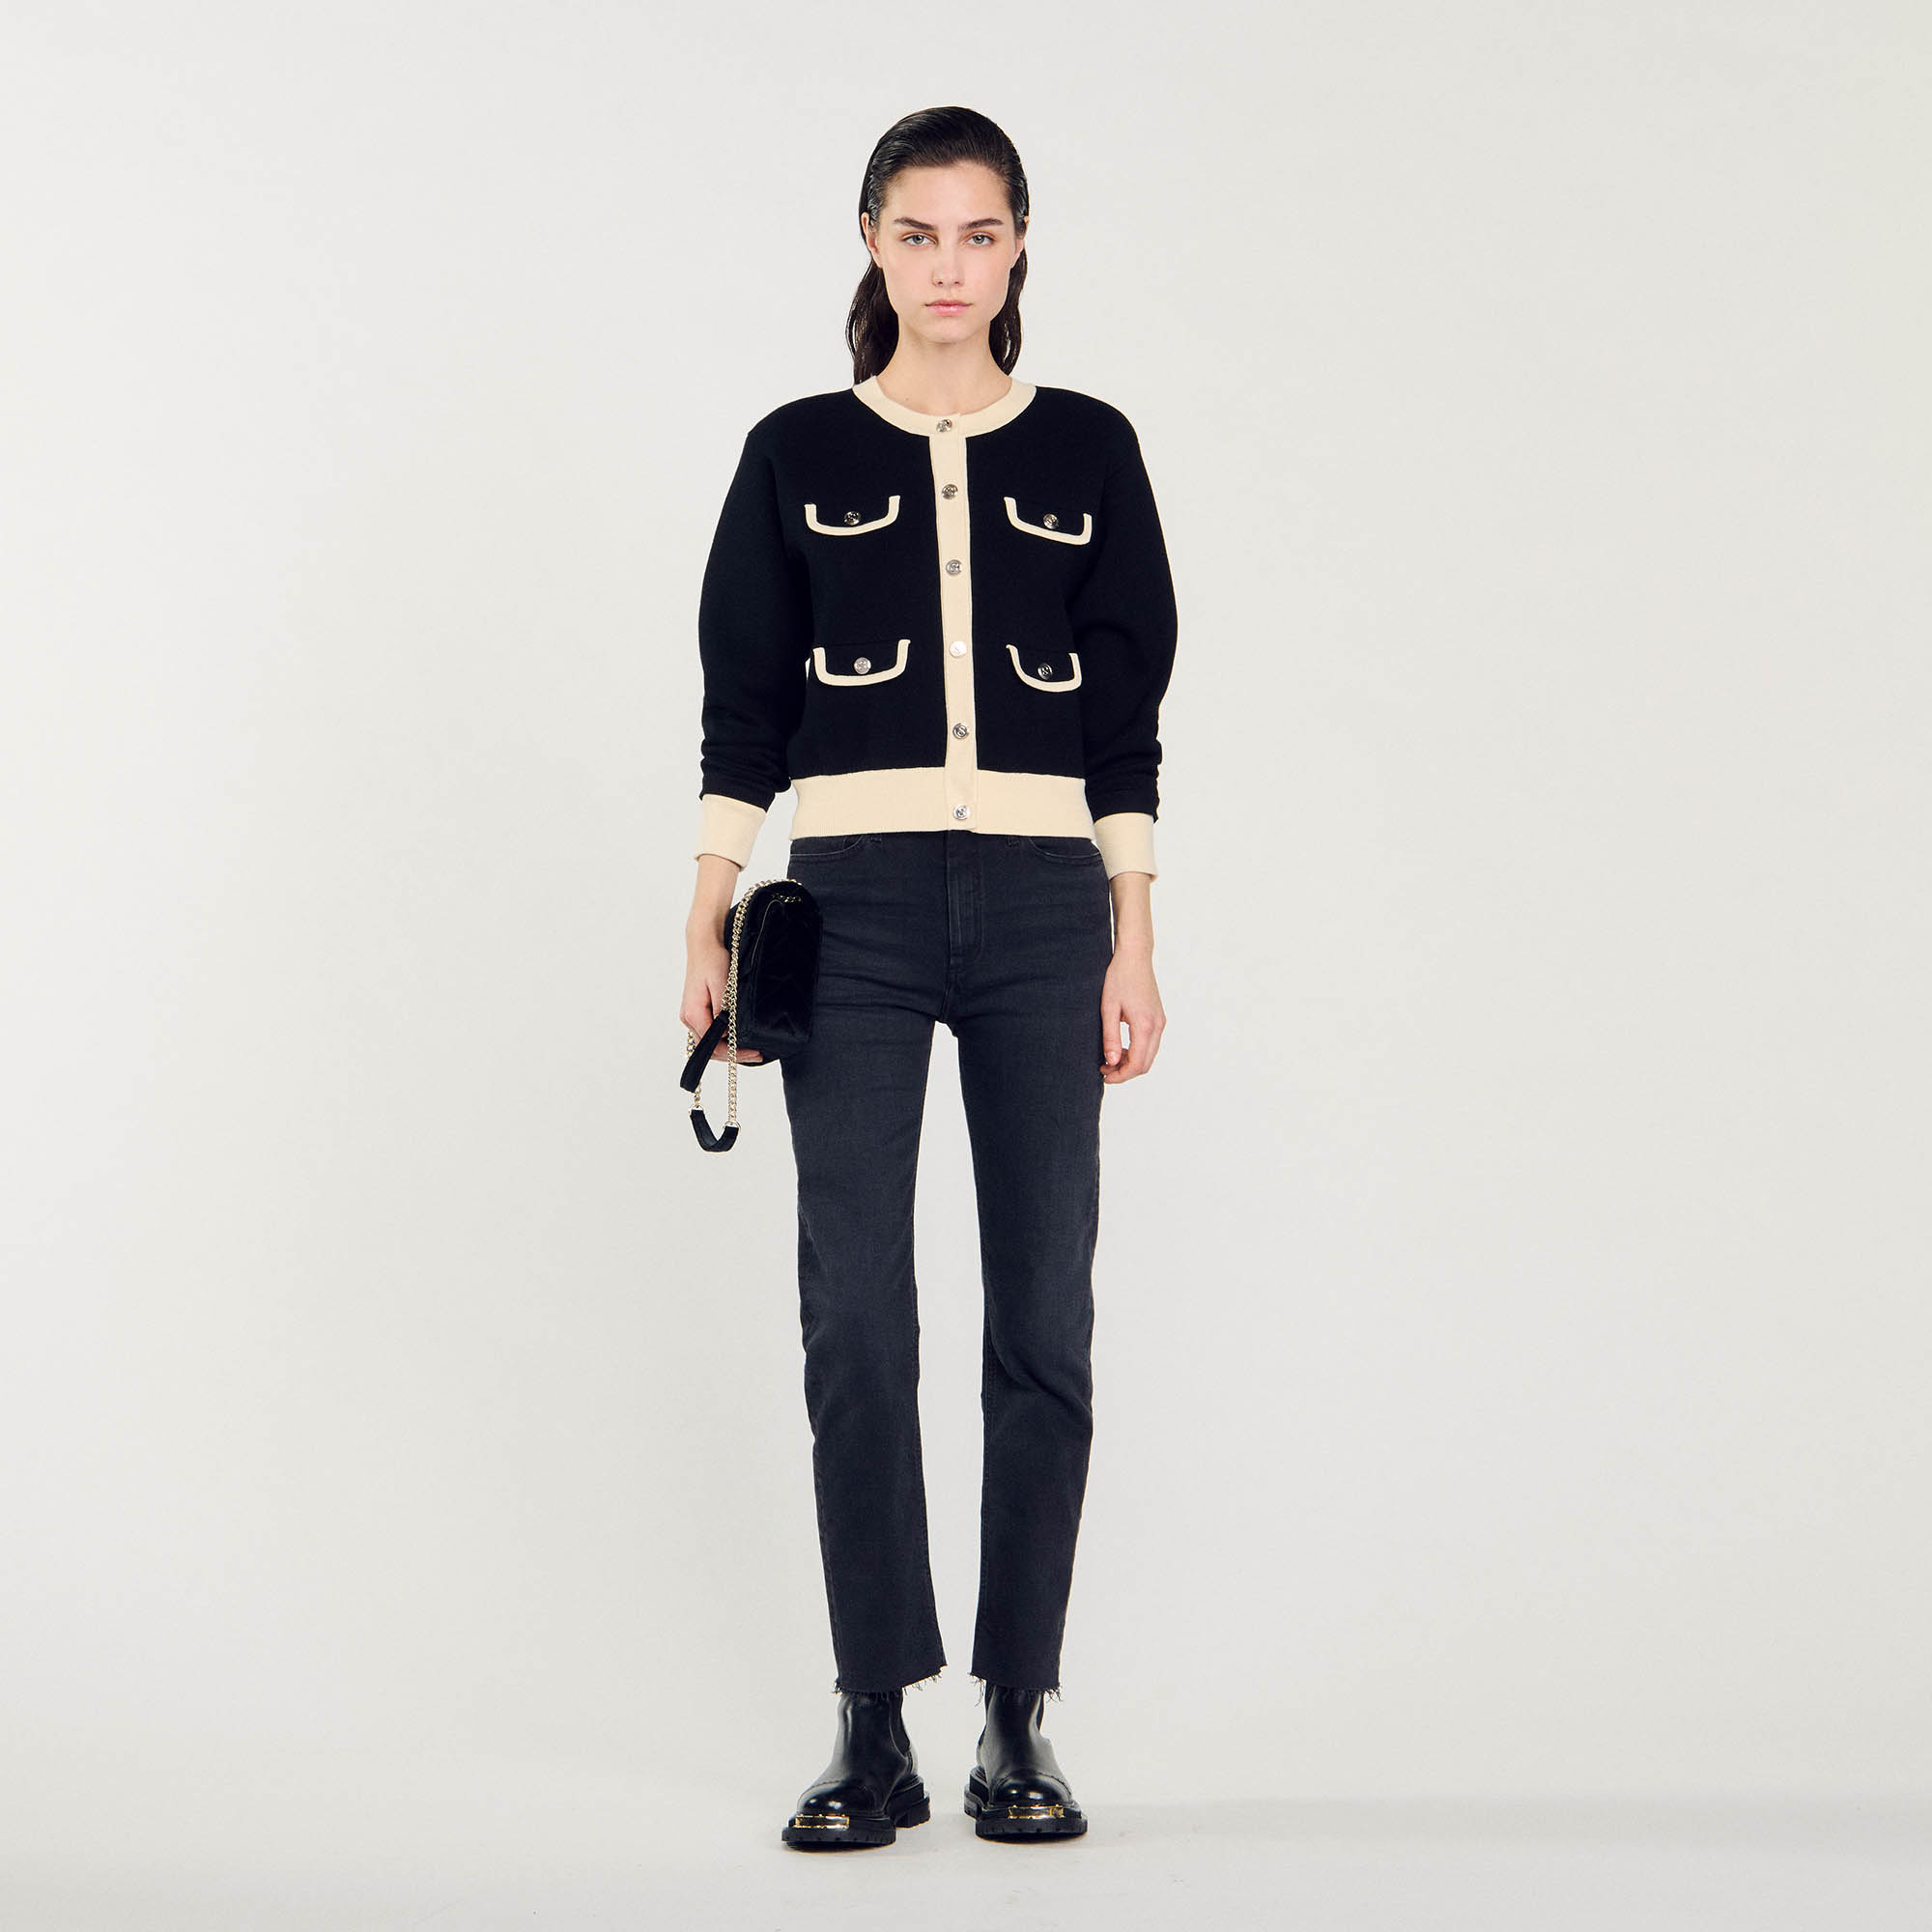 Sandro viscose Two-tone cardigan with long sleeves, flap pockets, and fancy buttons